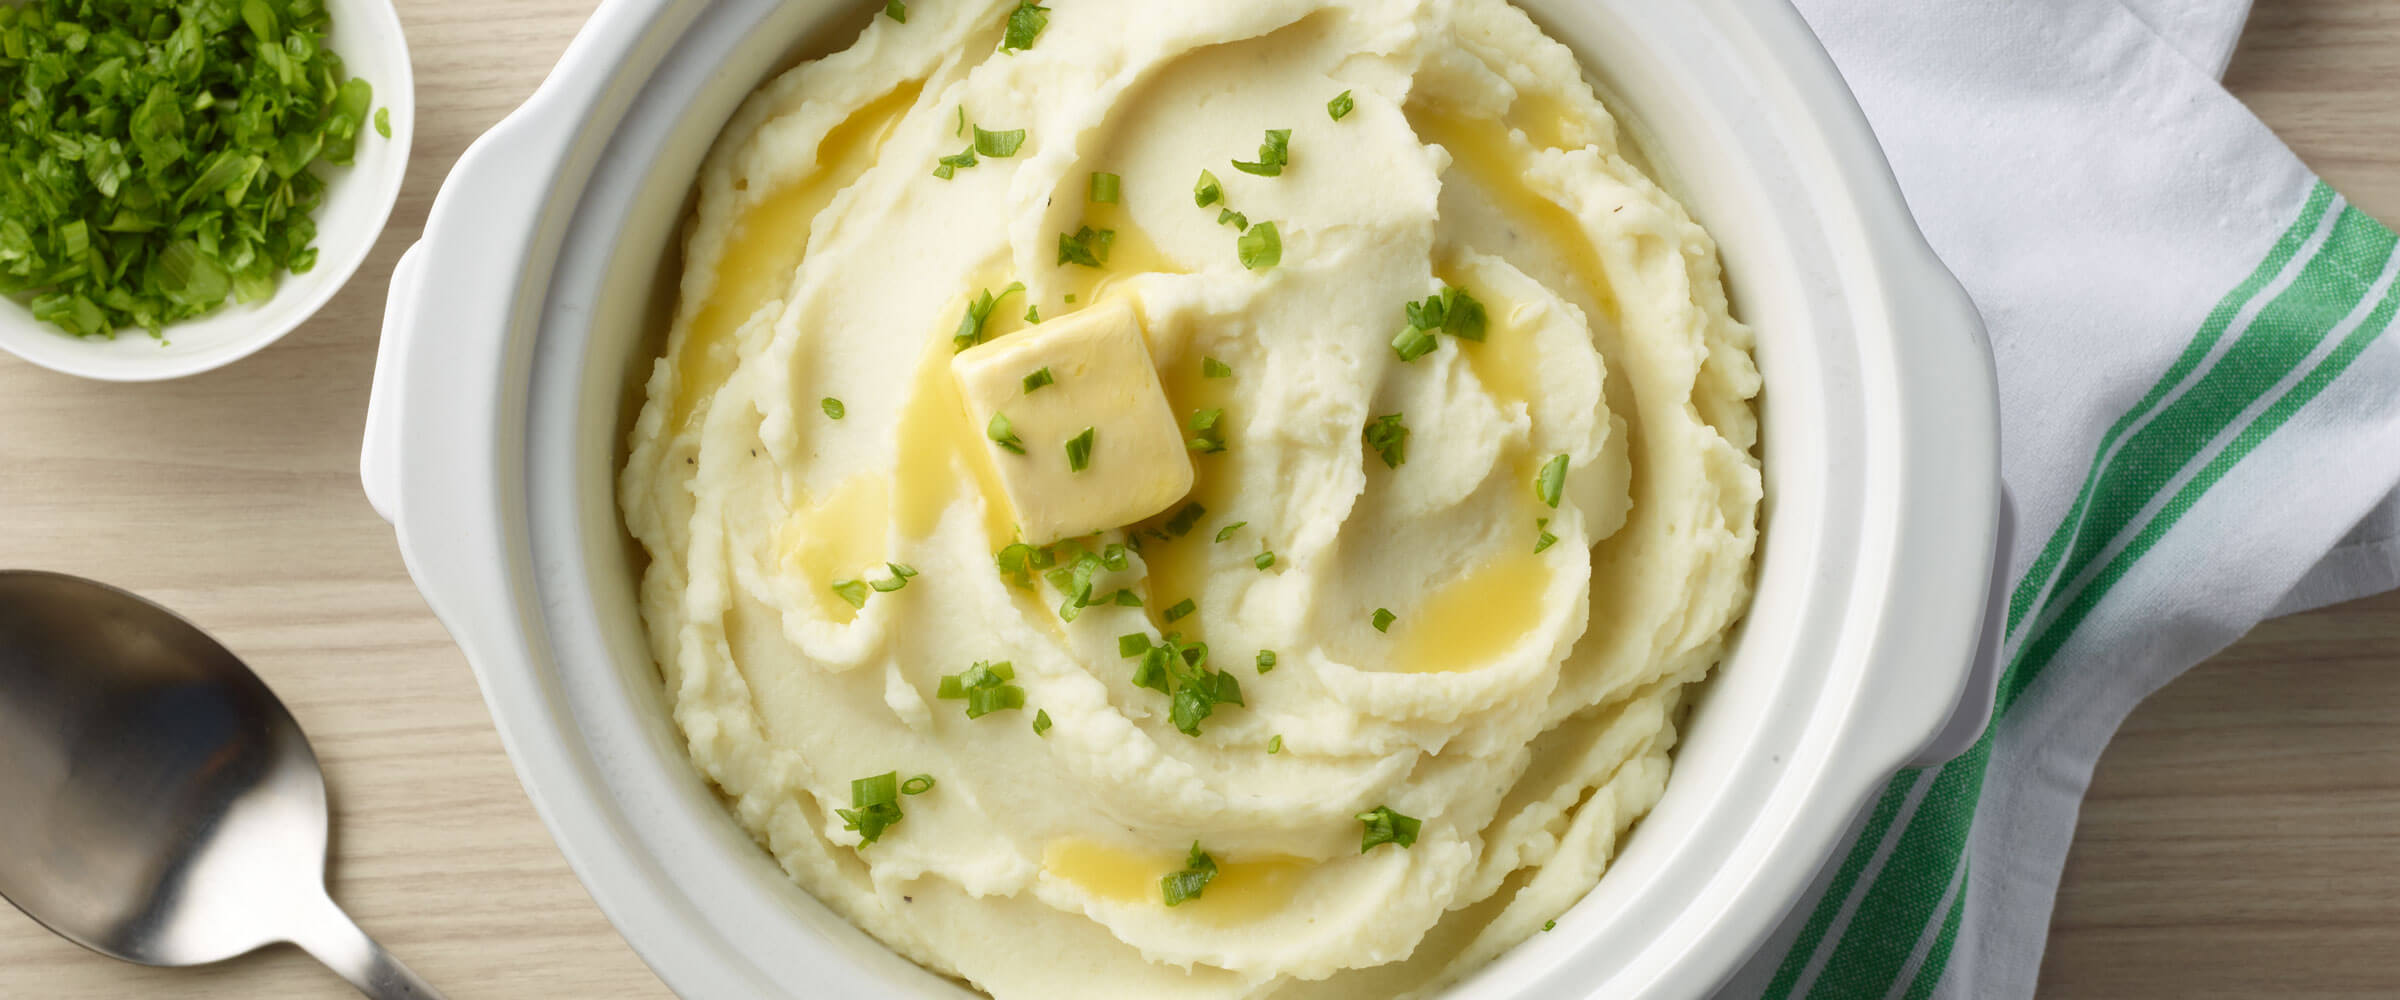 Slow-Cooker Mashed Potatoes topped with butter and garnish in white dish